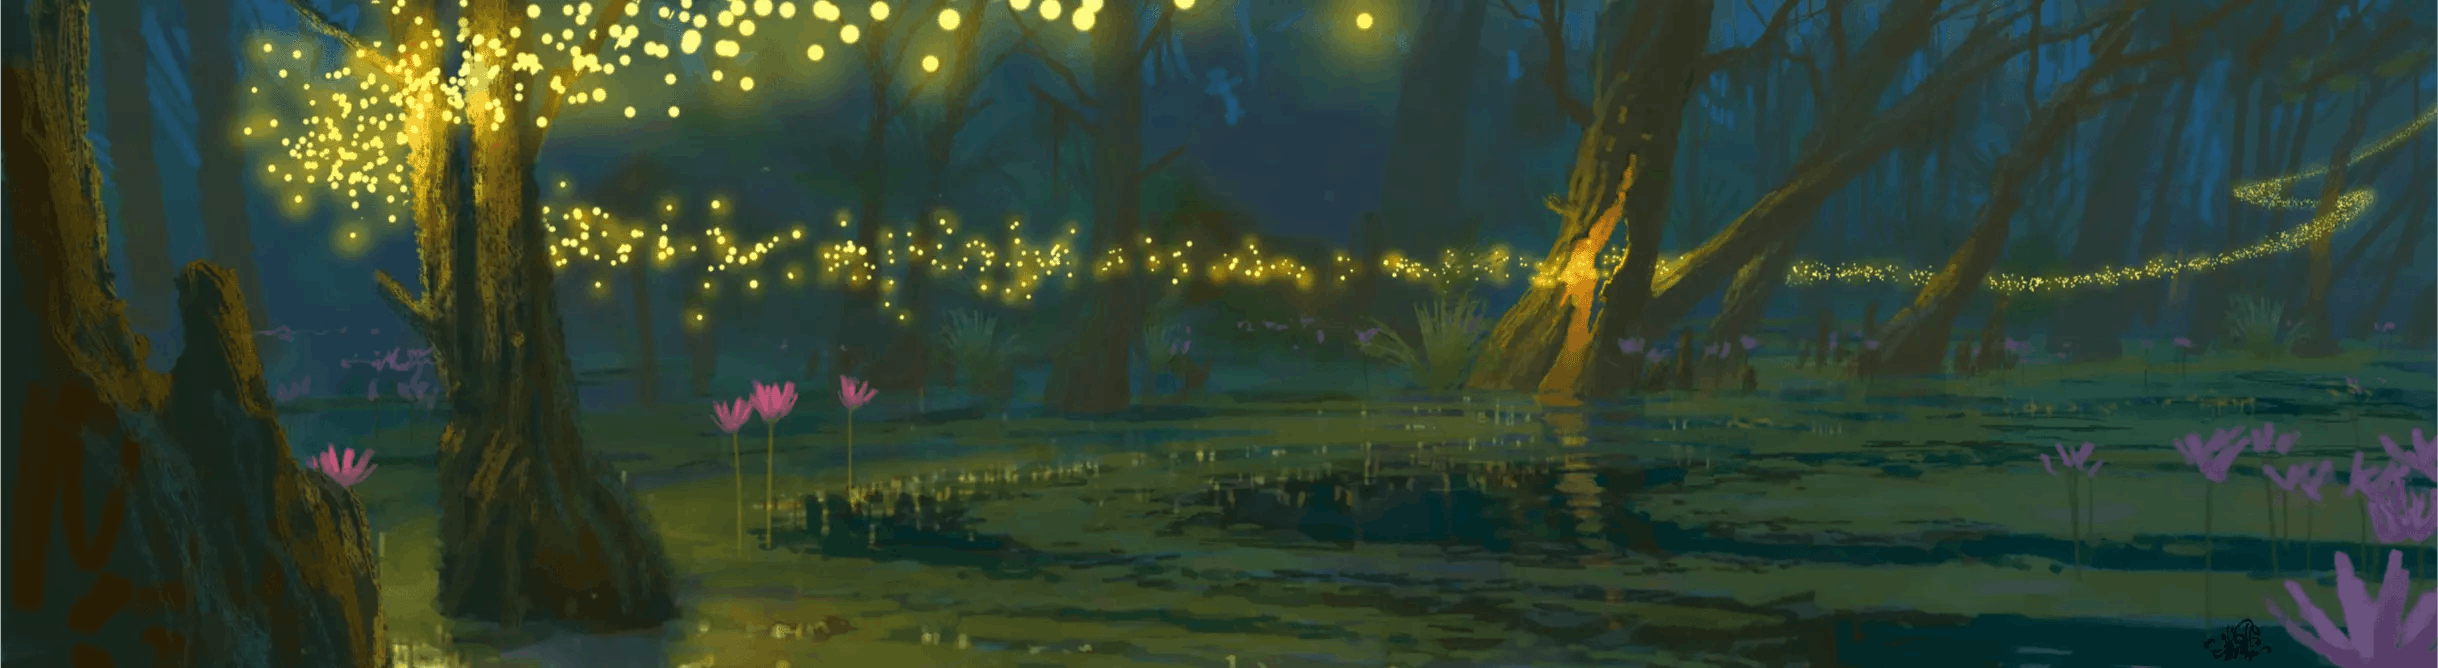 An illustration of fireflies in a swamp